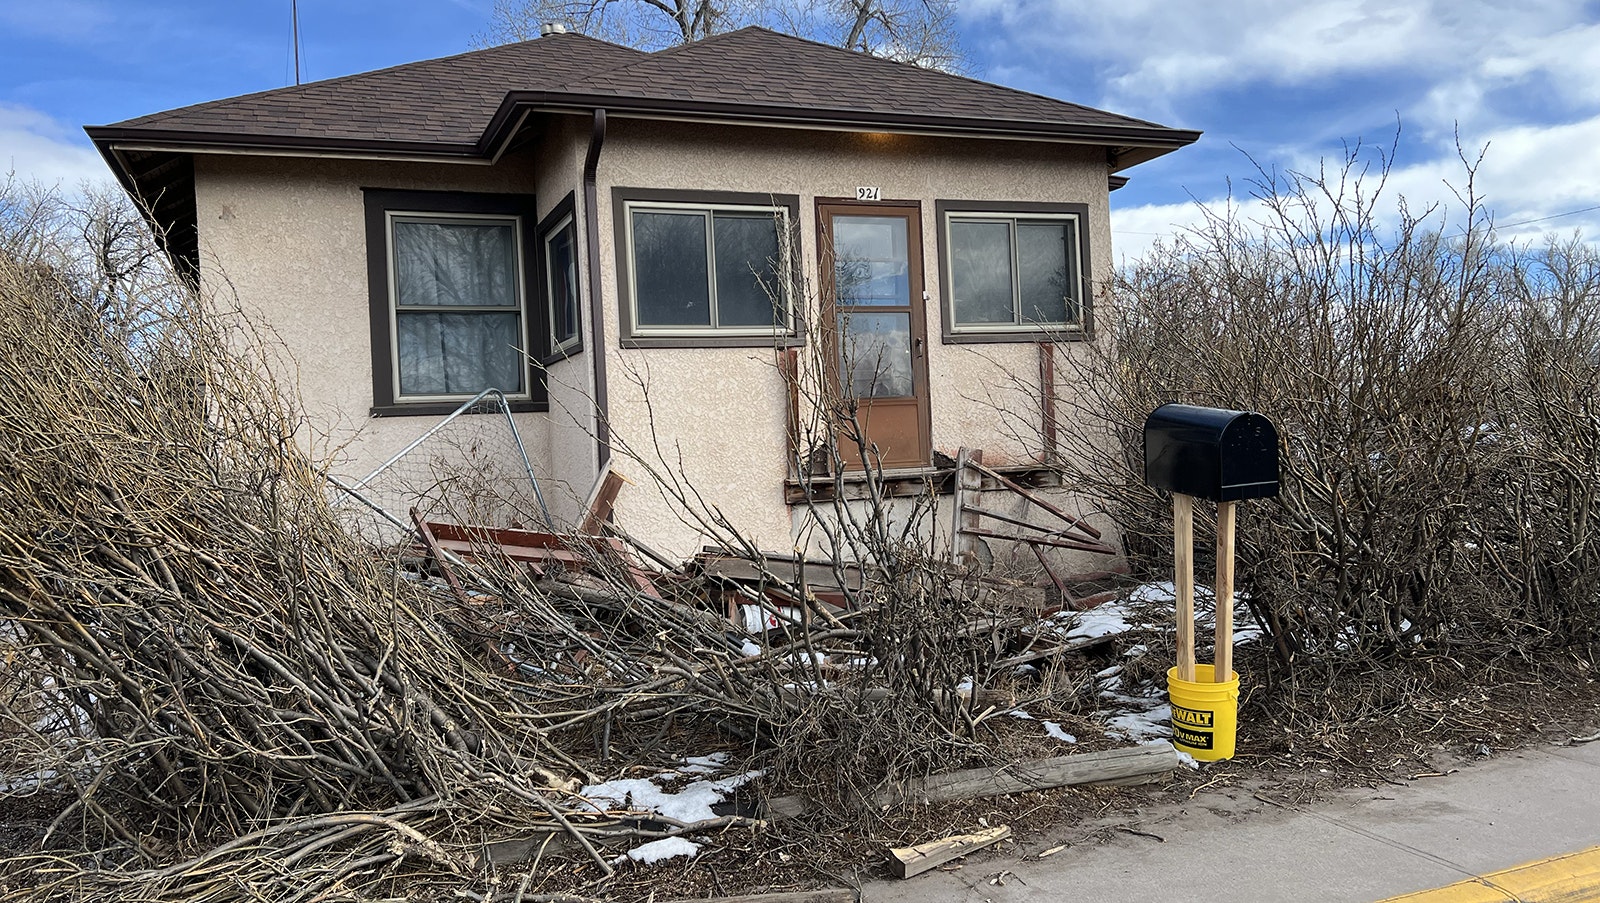 The front steps and porch of this house were taken out by a car that led Laramie police on a chase exceeding 100 mph at one point.